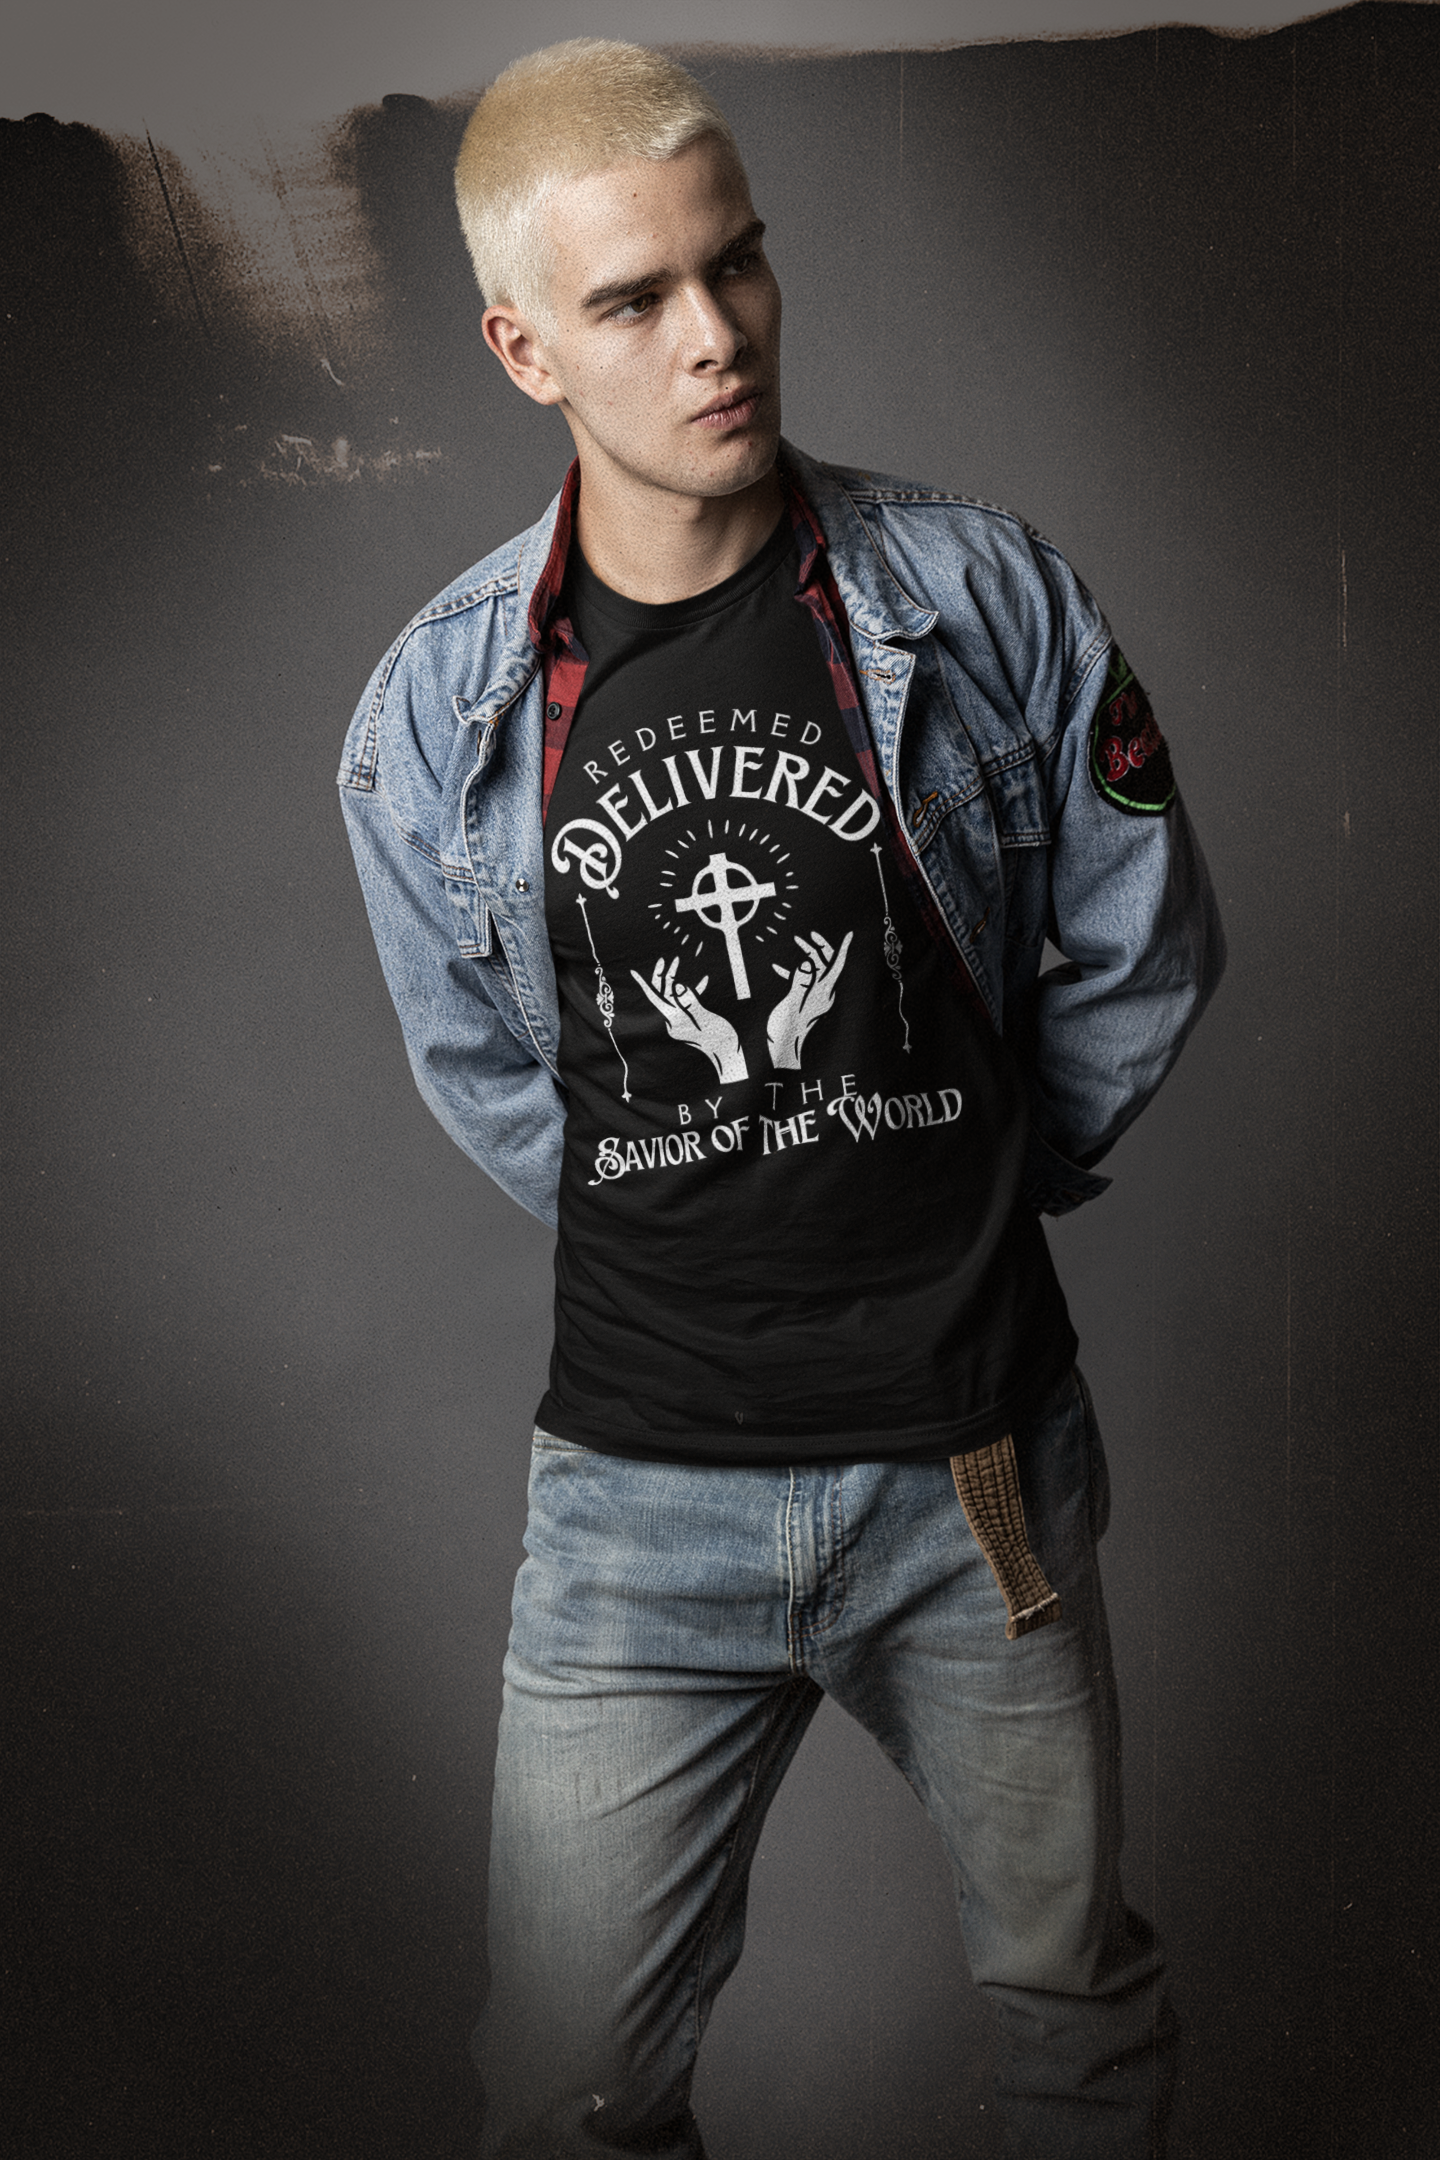 Redeemed and Delivered Christian Grunge Shirt Mens with Jacket